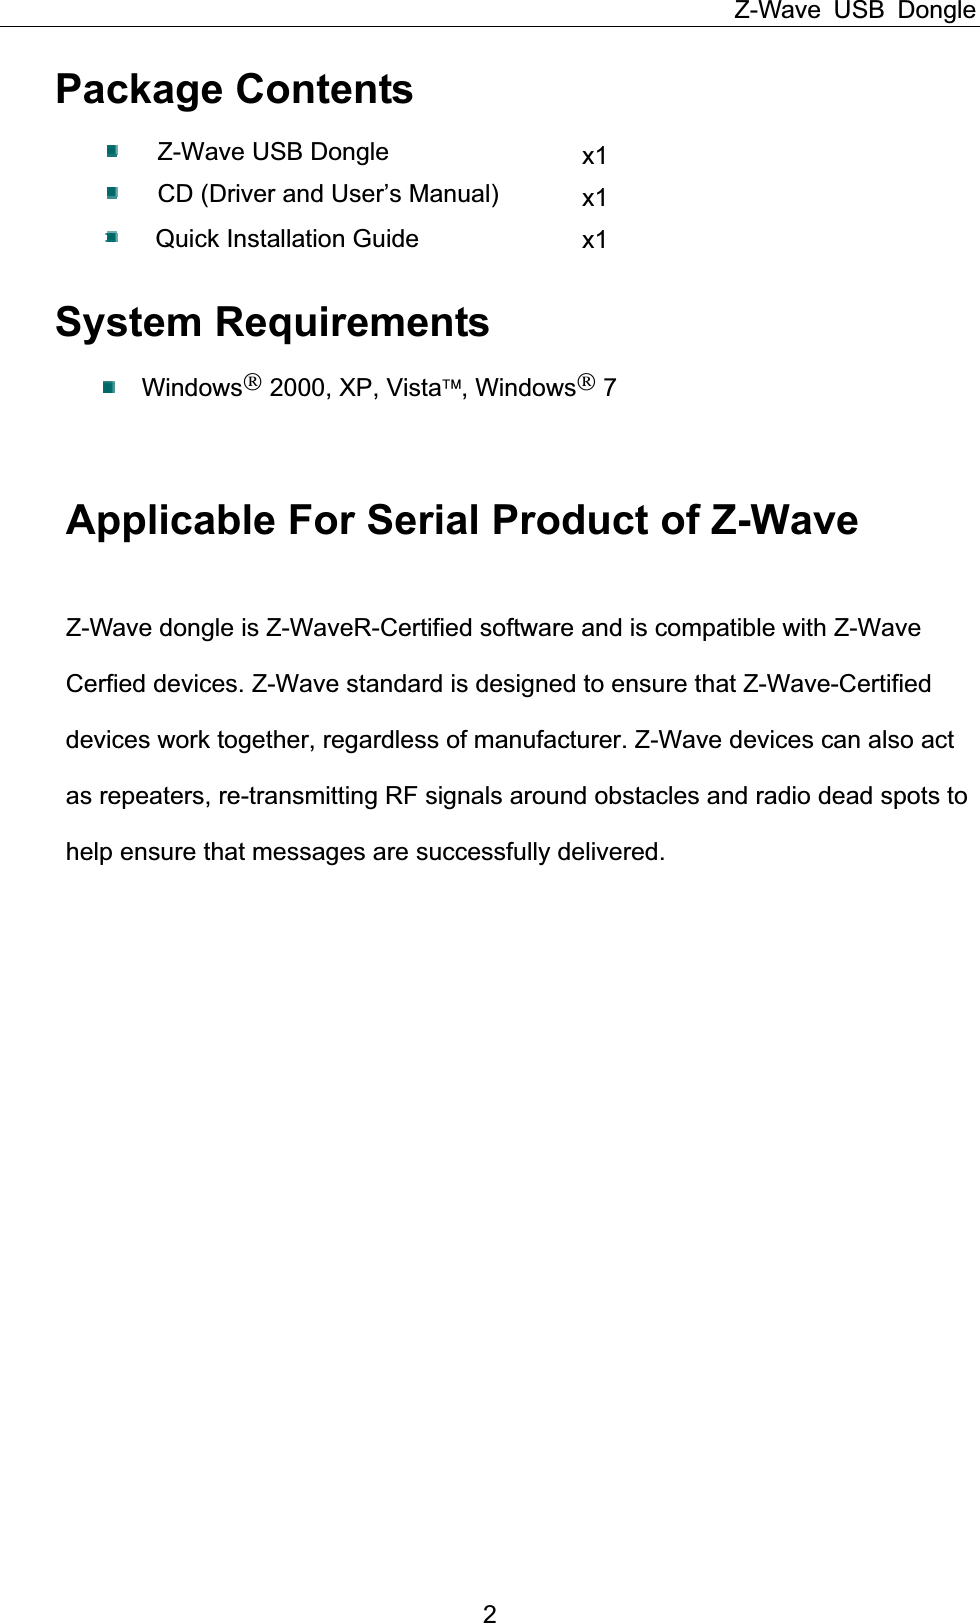 Z-Wave USB Dongle 2Package Contents Z-Wave USB Dongle  x1CD (Driver and User’s Manual)  x1Quick Installation Guide      x1System Requirements Windows 2000, XP, Vista¥, Windows 7 Applicable For Serial Product of Z-Wave Z-Wave dongle is Z-WaveR-Certified software and is compatible with Z-Wave                Cerfied devices. Z-Wave standard is designed to ensure that Z-Wave-Certified              devices work together, regardless of manufacturer. Z-Wave devices can also act             as repeaters, re-transmitting RF signals around obstacles and radio dead spots to        help ensure that messages are successfully delivered. 